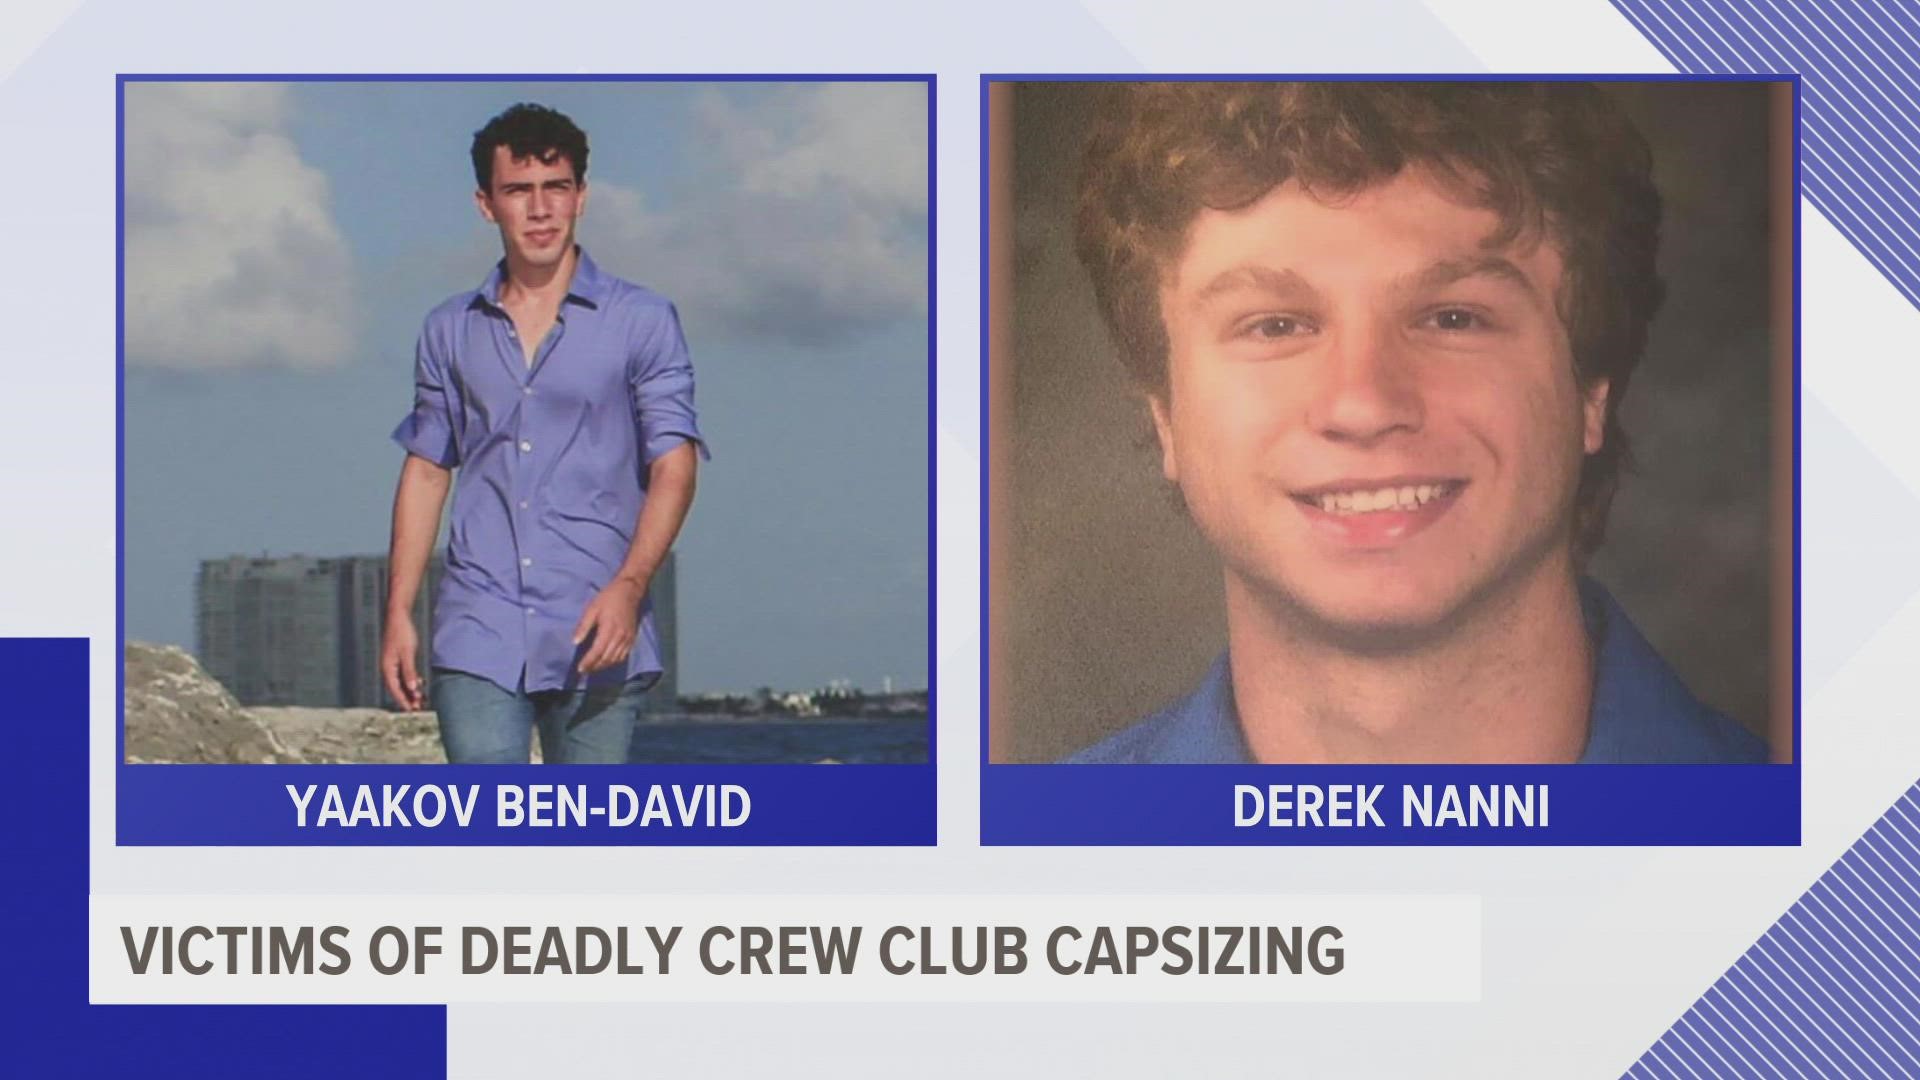 Iowa State University commissioned two reviews following the accident that left students Derek Nanni and Yaakov Ben-David dead on March 28.